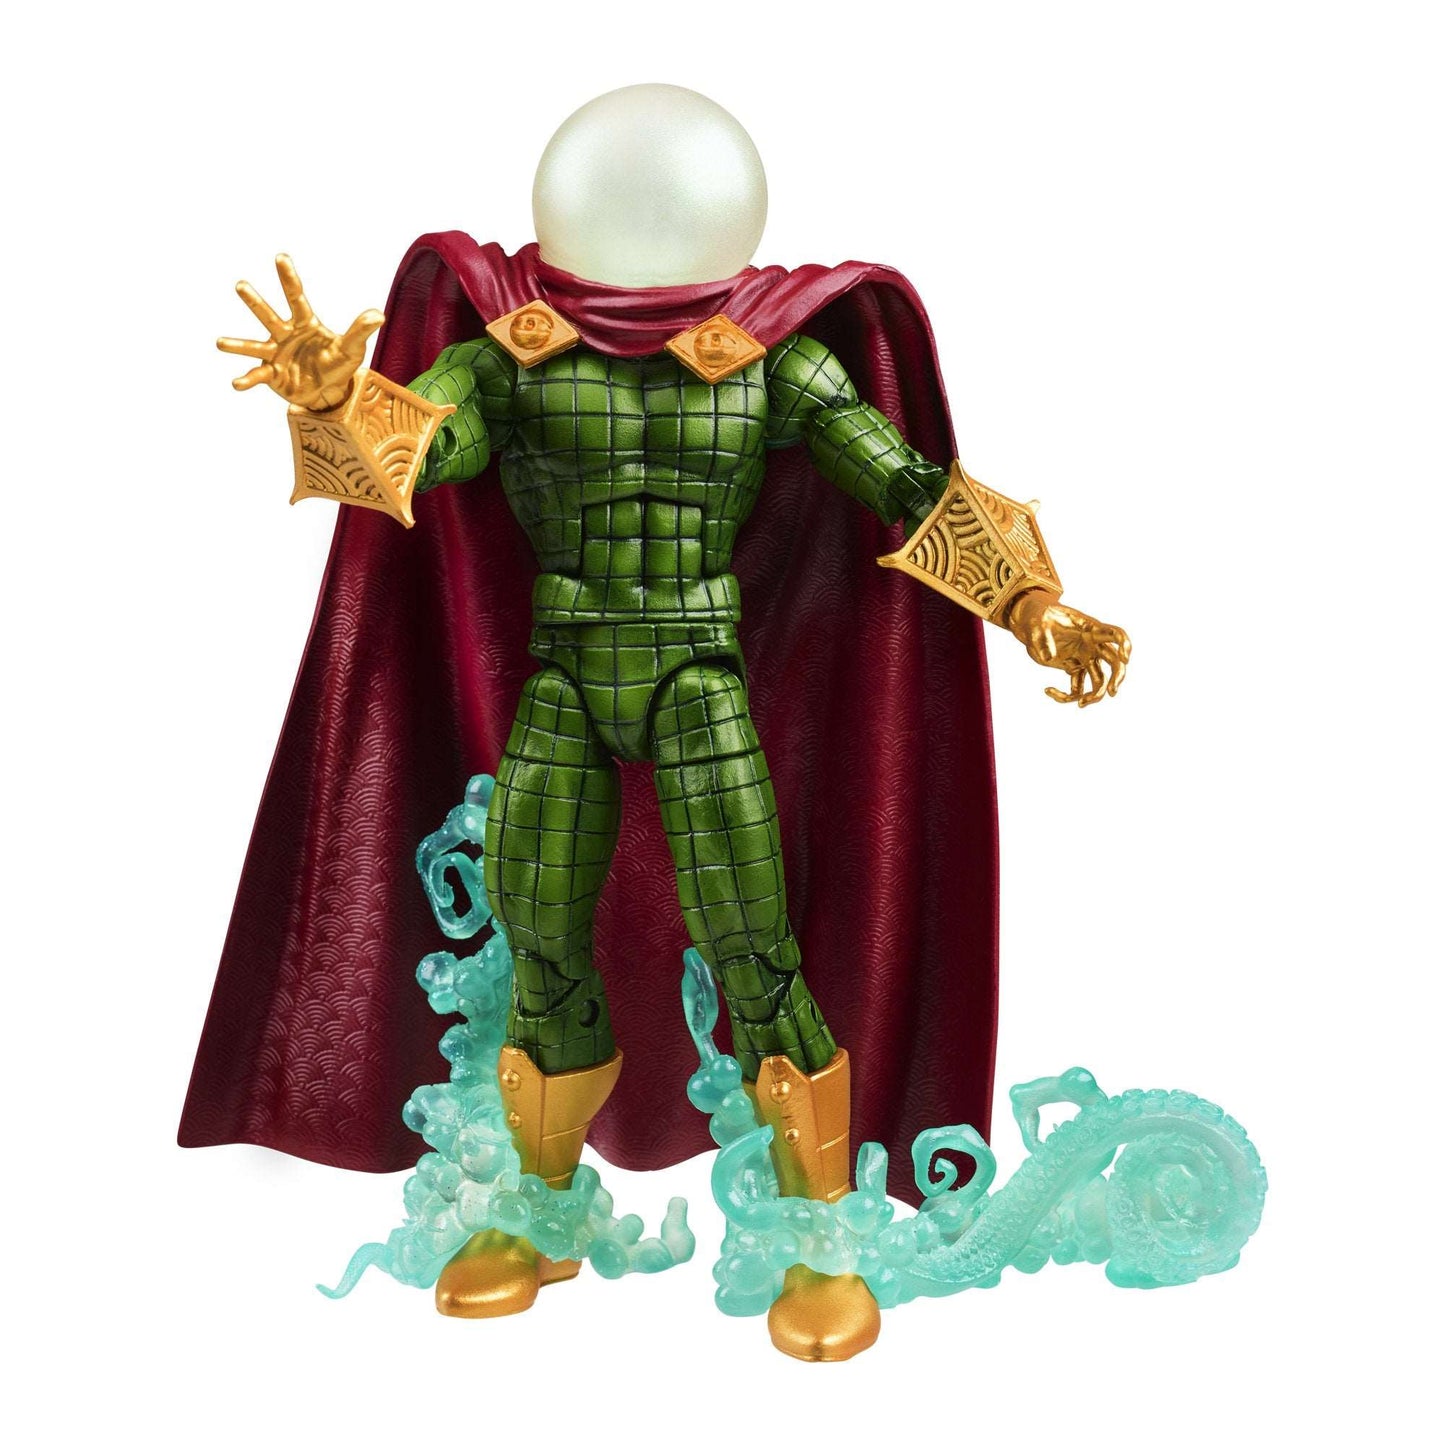 Marvel Legends Retro Collection Quentin Beck Mysterio figure and accessories